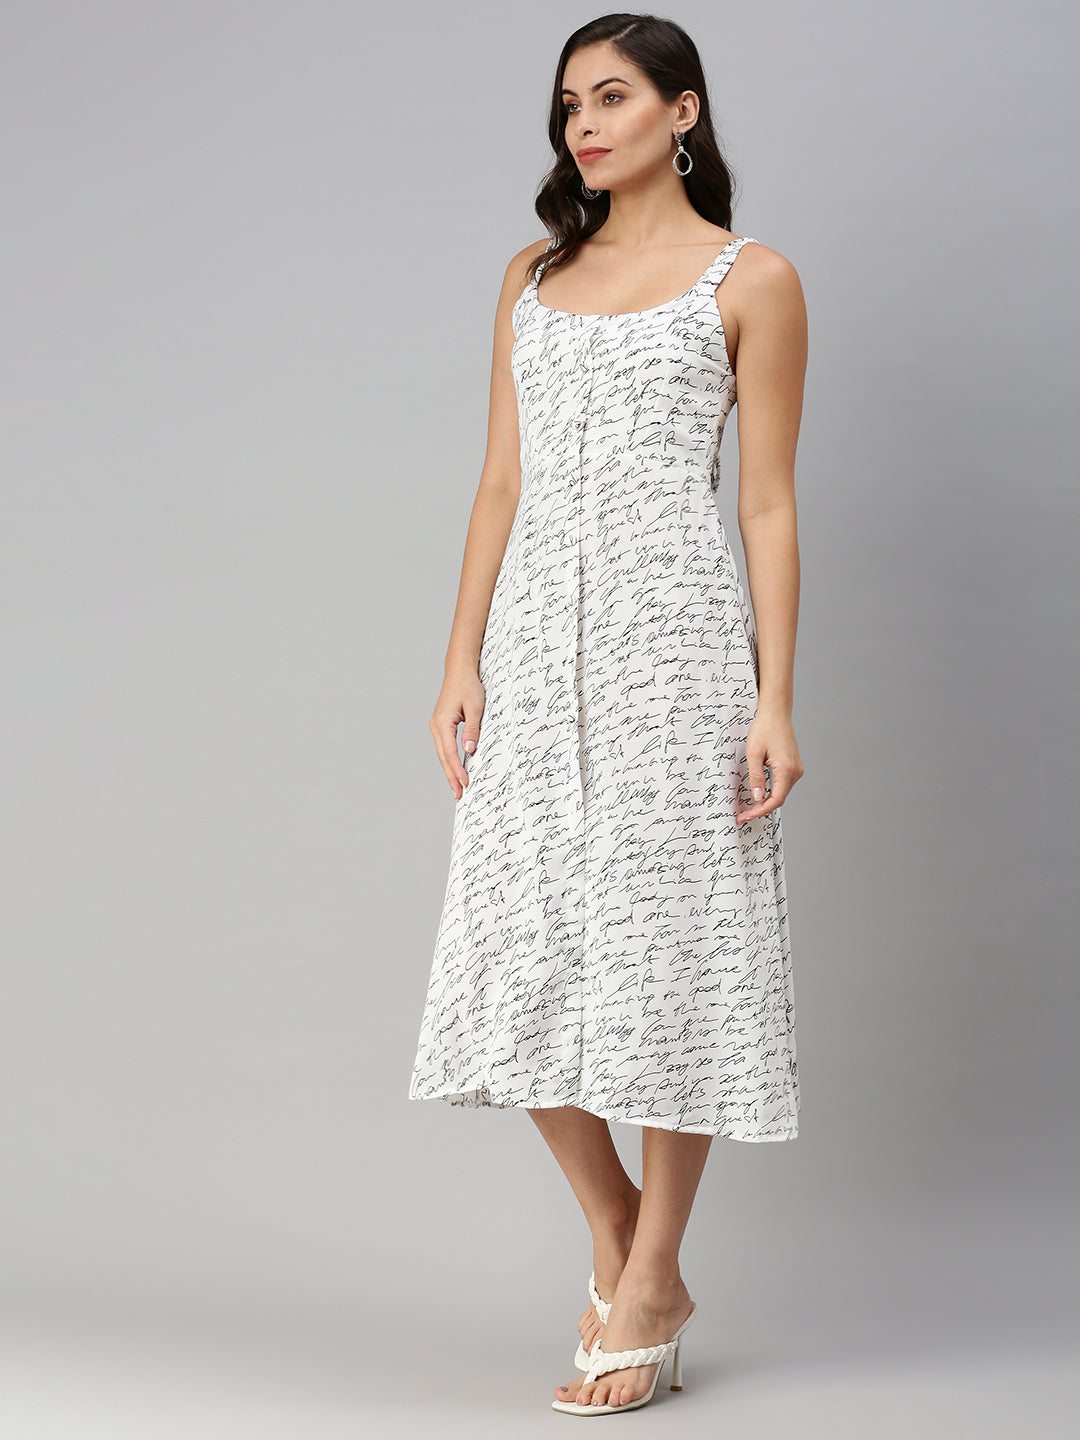 Women's Typography White Fit and Flare Dress